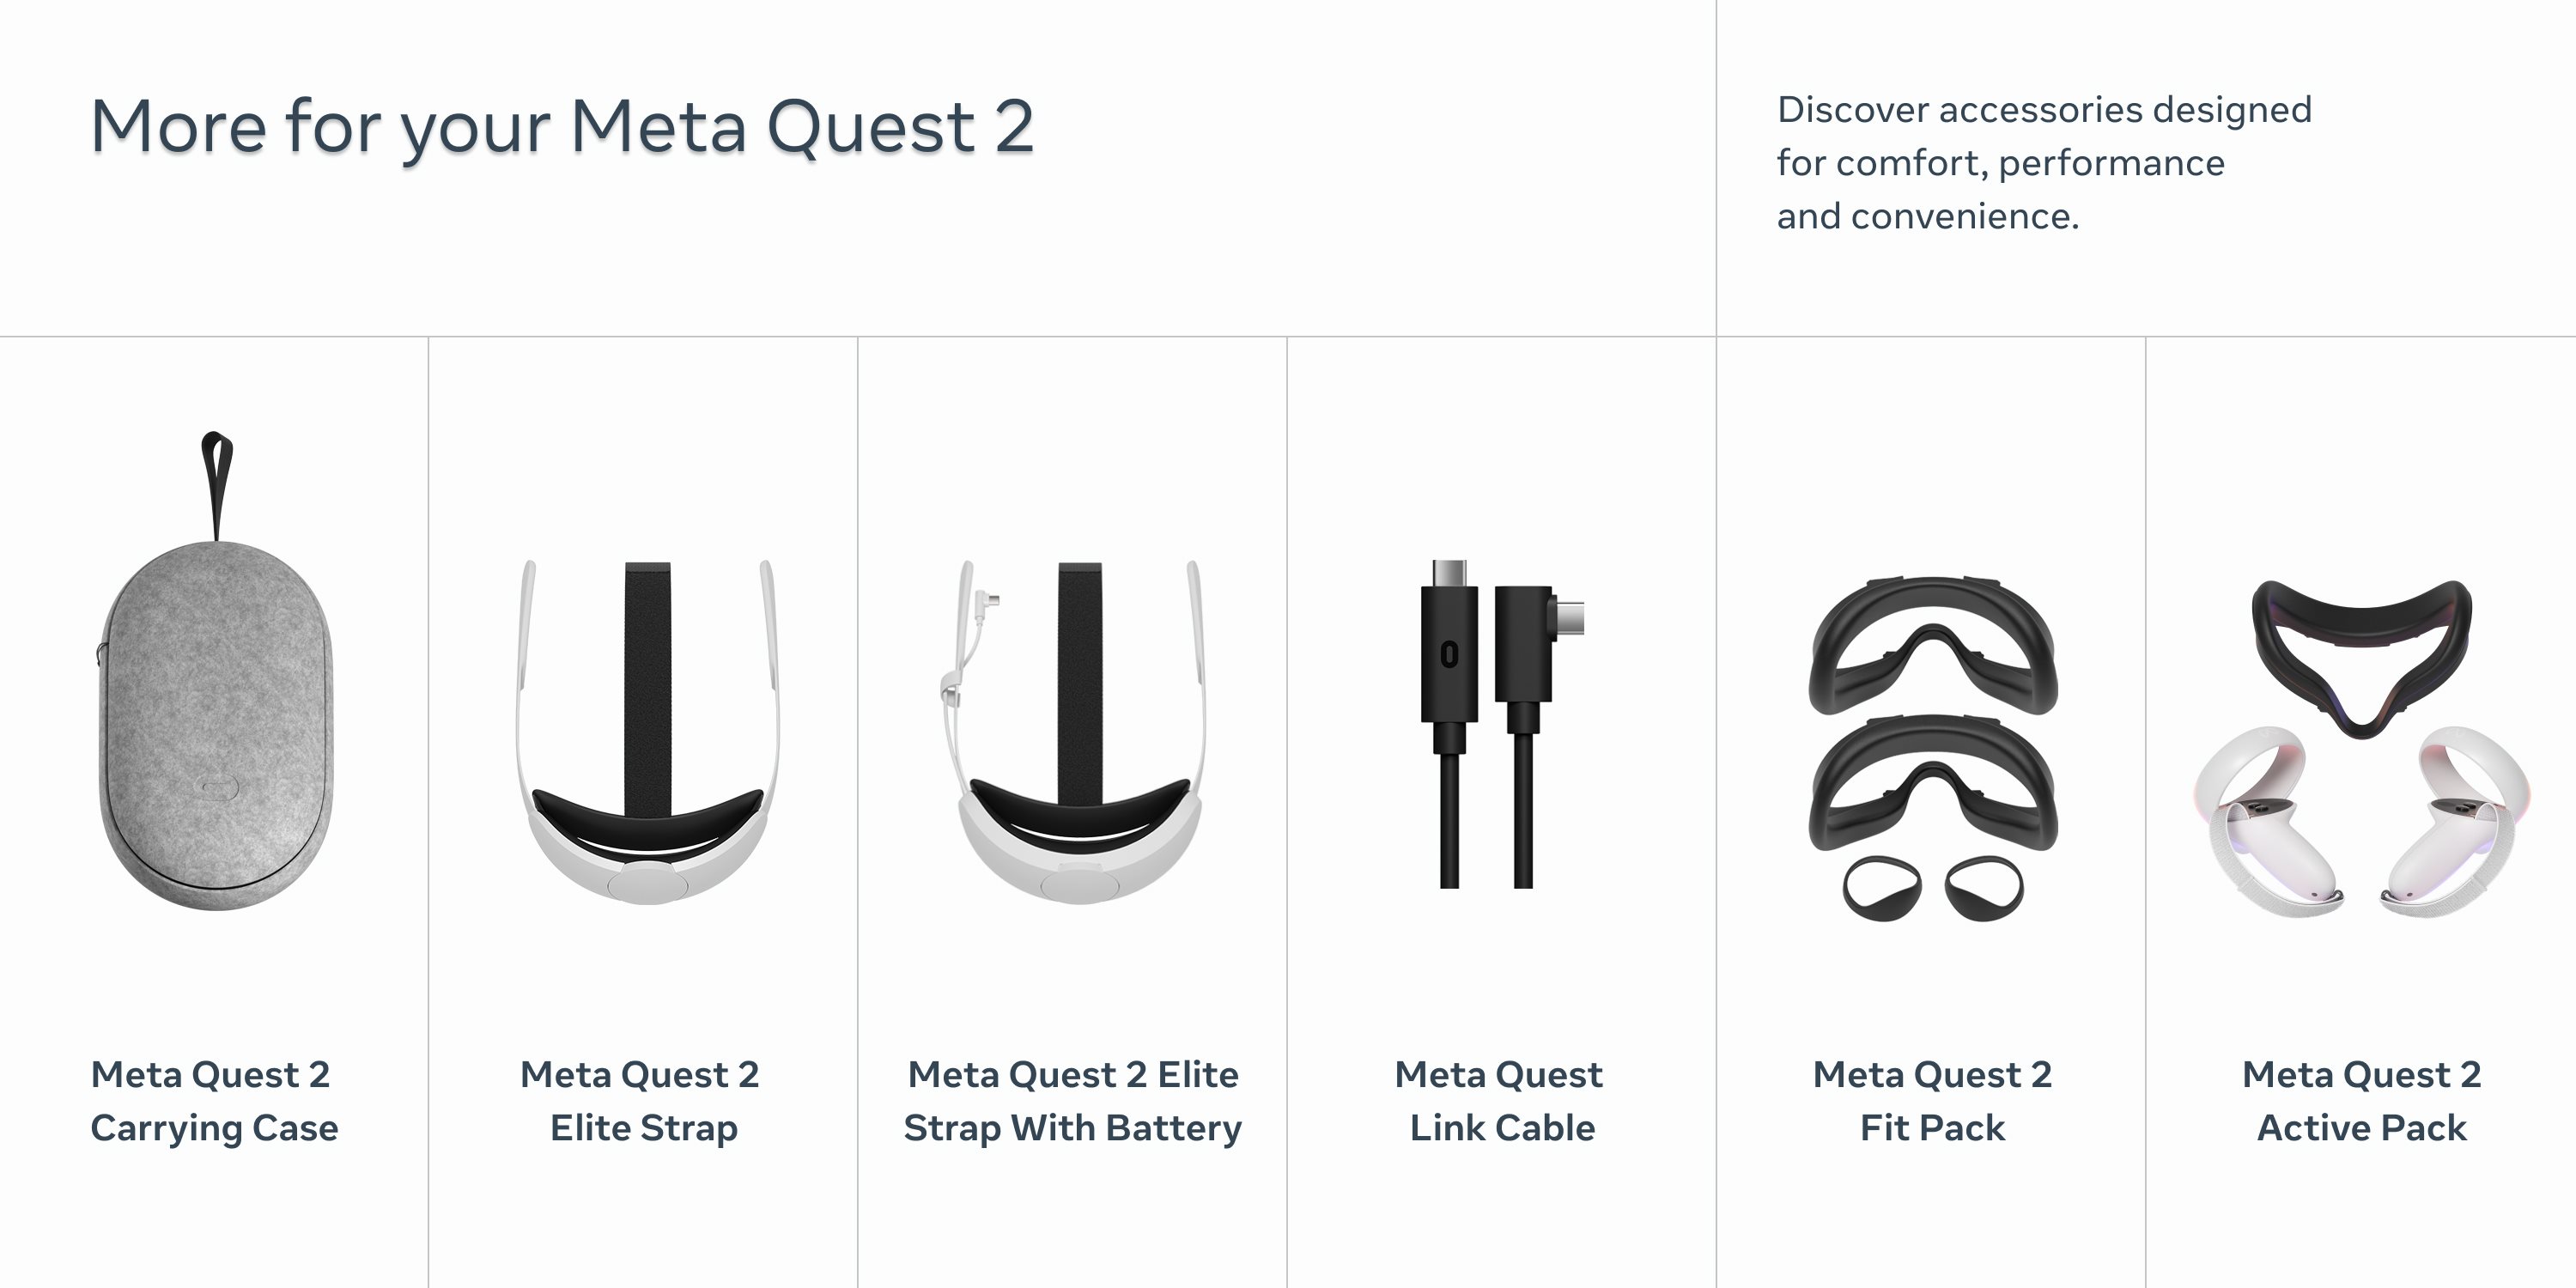 Deal Alert: Score a Meta Quest 2 256GB VR Headset for Only $330.56